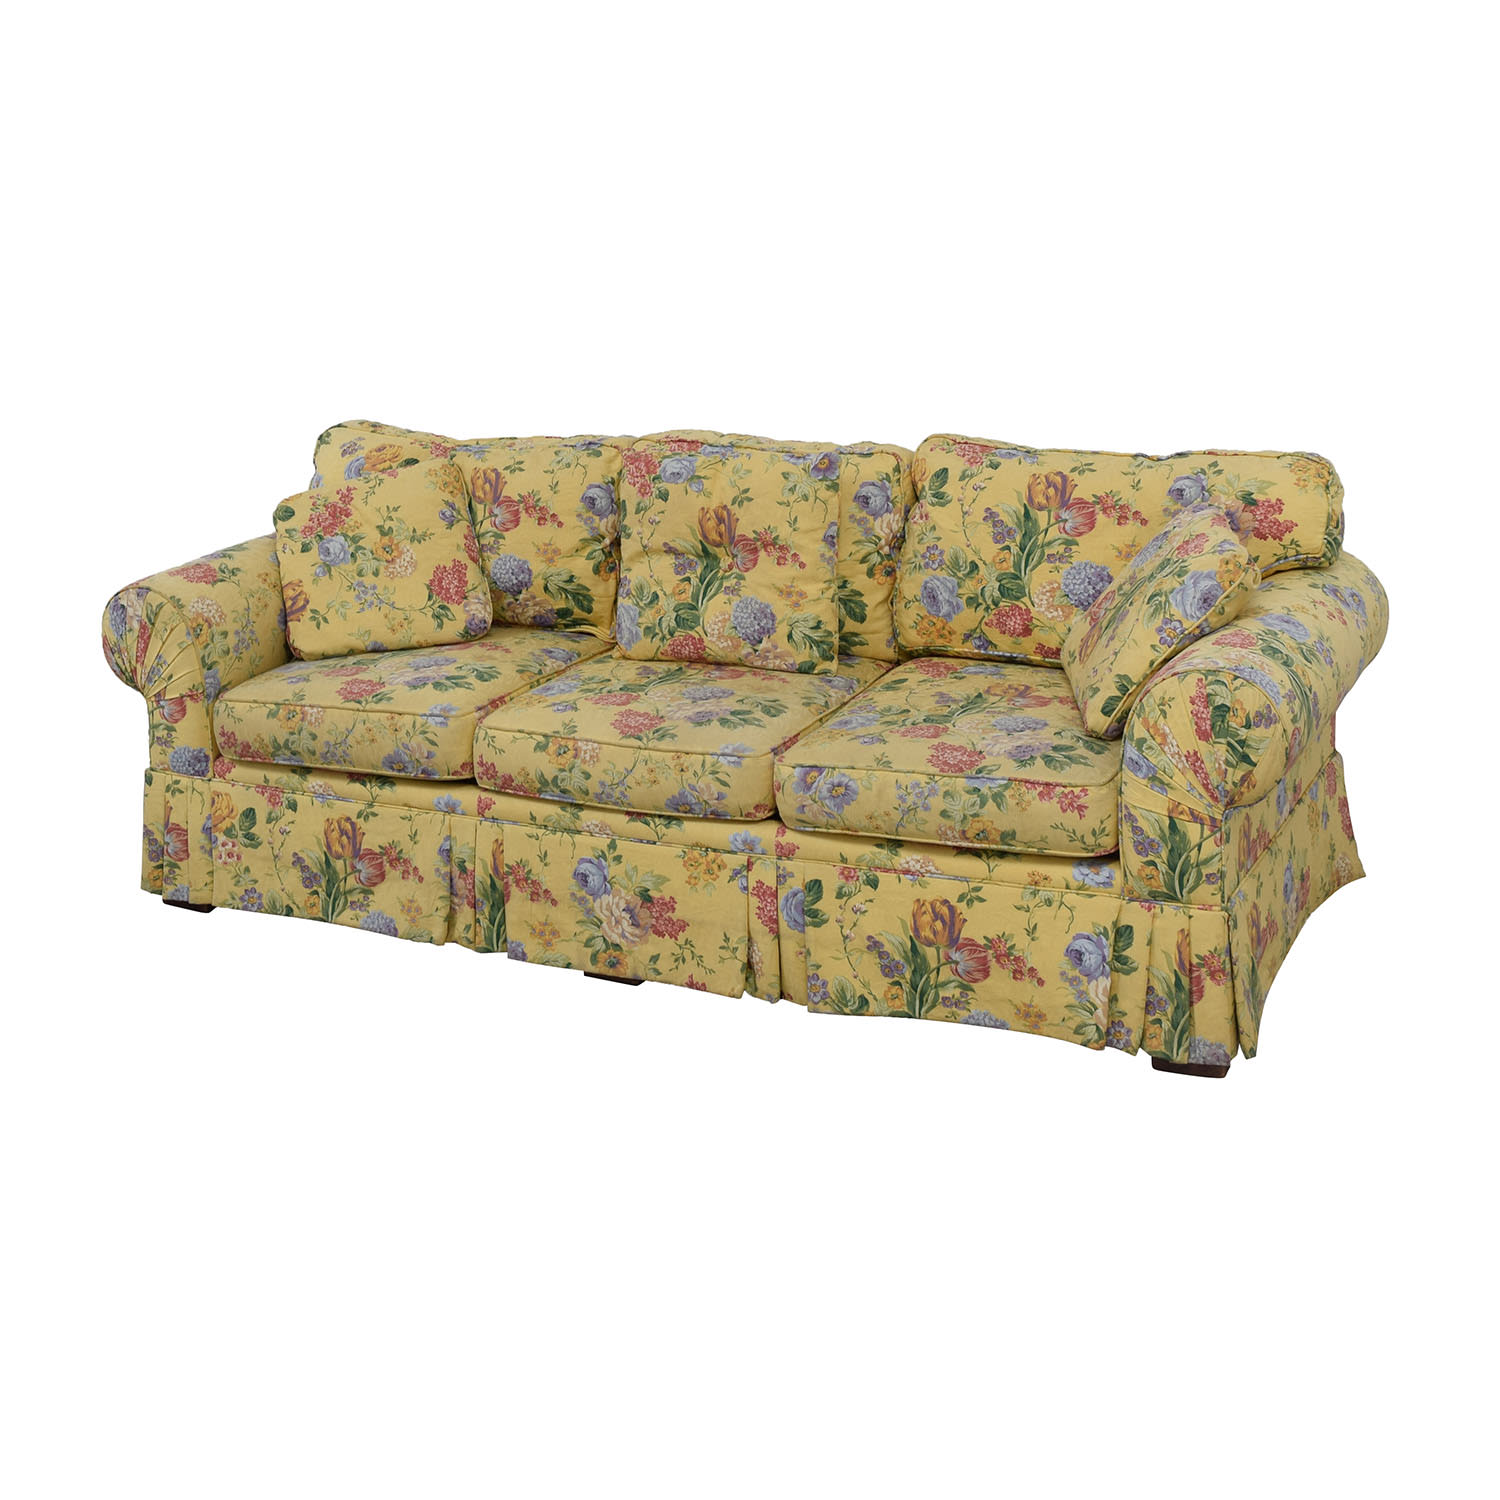 https://res.cloudinary.com/dkqtxtobb/image/upload/f_auto,q_auto:best,w_1500/product-assets/25863/alexvale/sofas/classic-sofas/buy-alexvale-yellow-floral-two-cushion-couch.jpeg